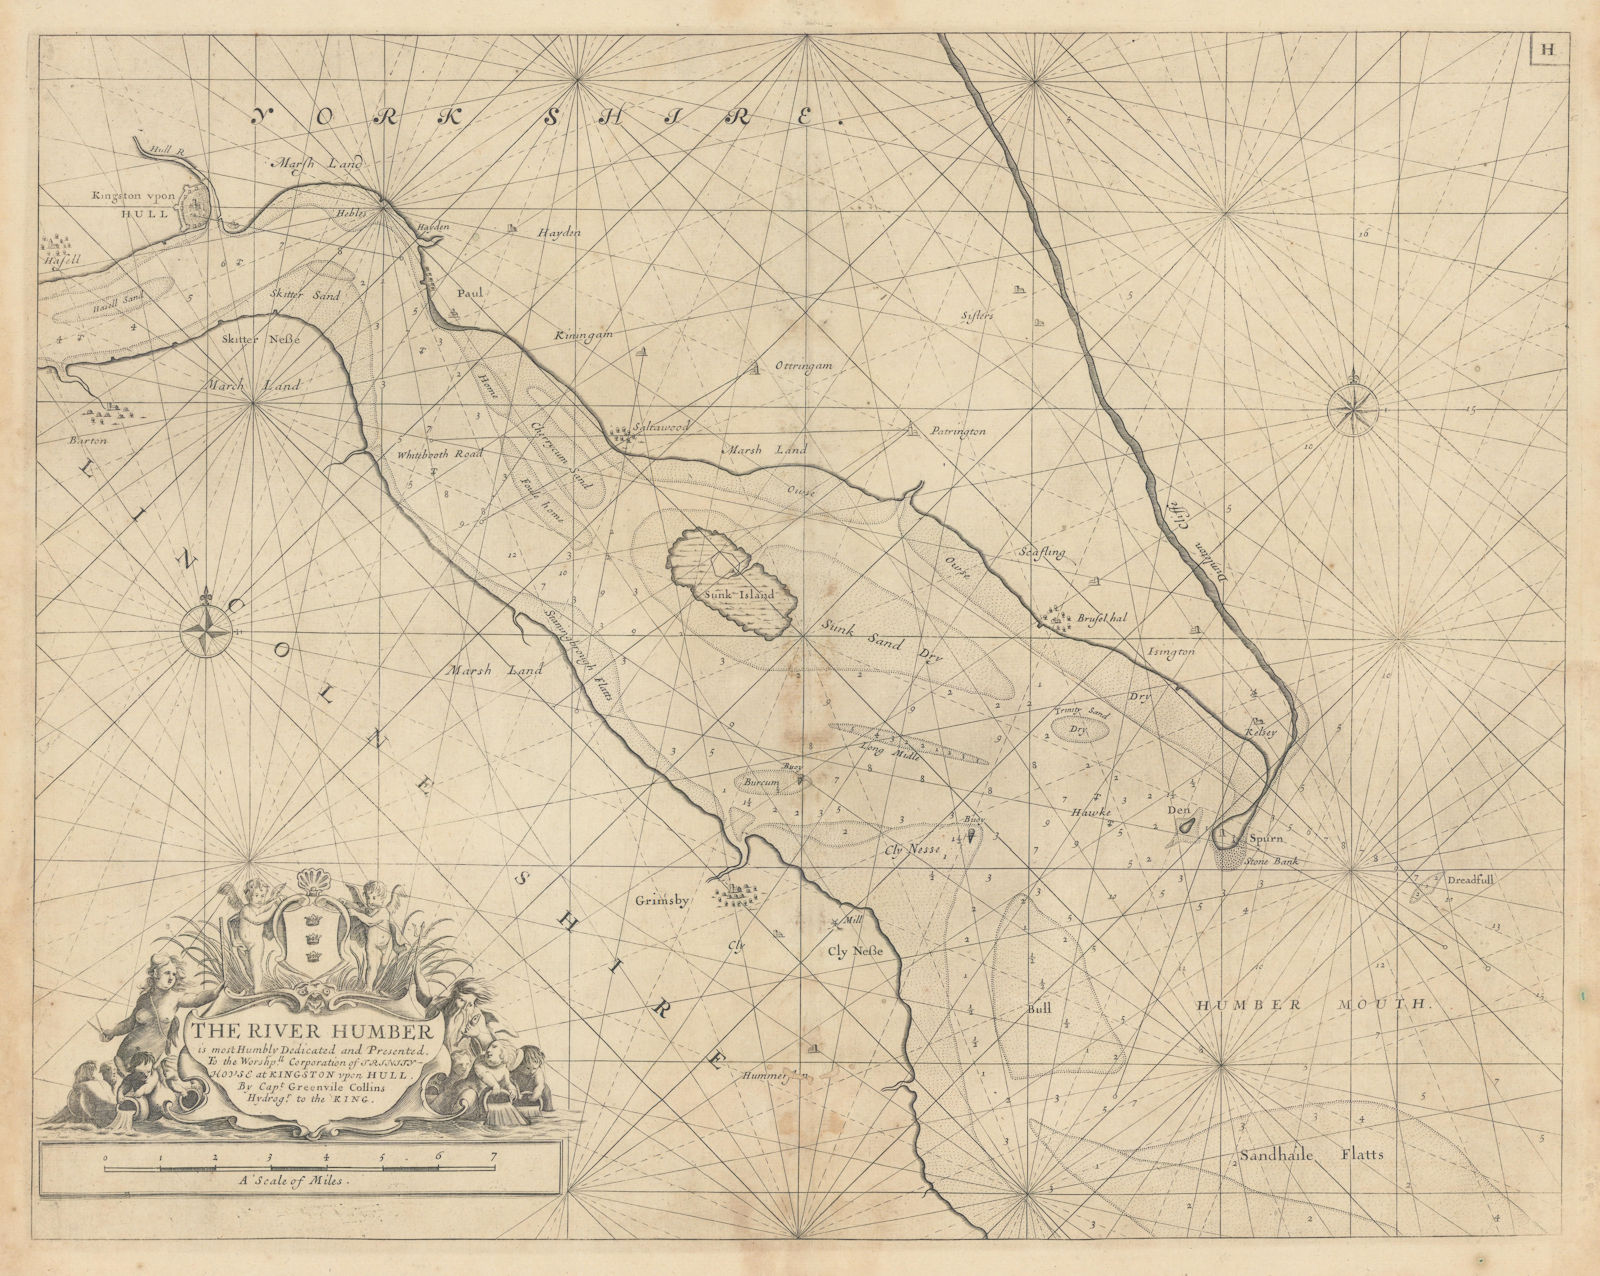 The River Humber estuary sea chart. Hull, Grimsby & Barton. COLLINS 1723 map